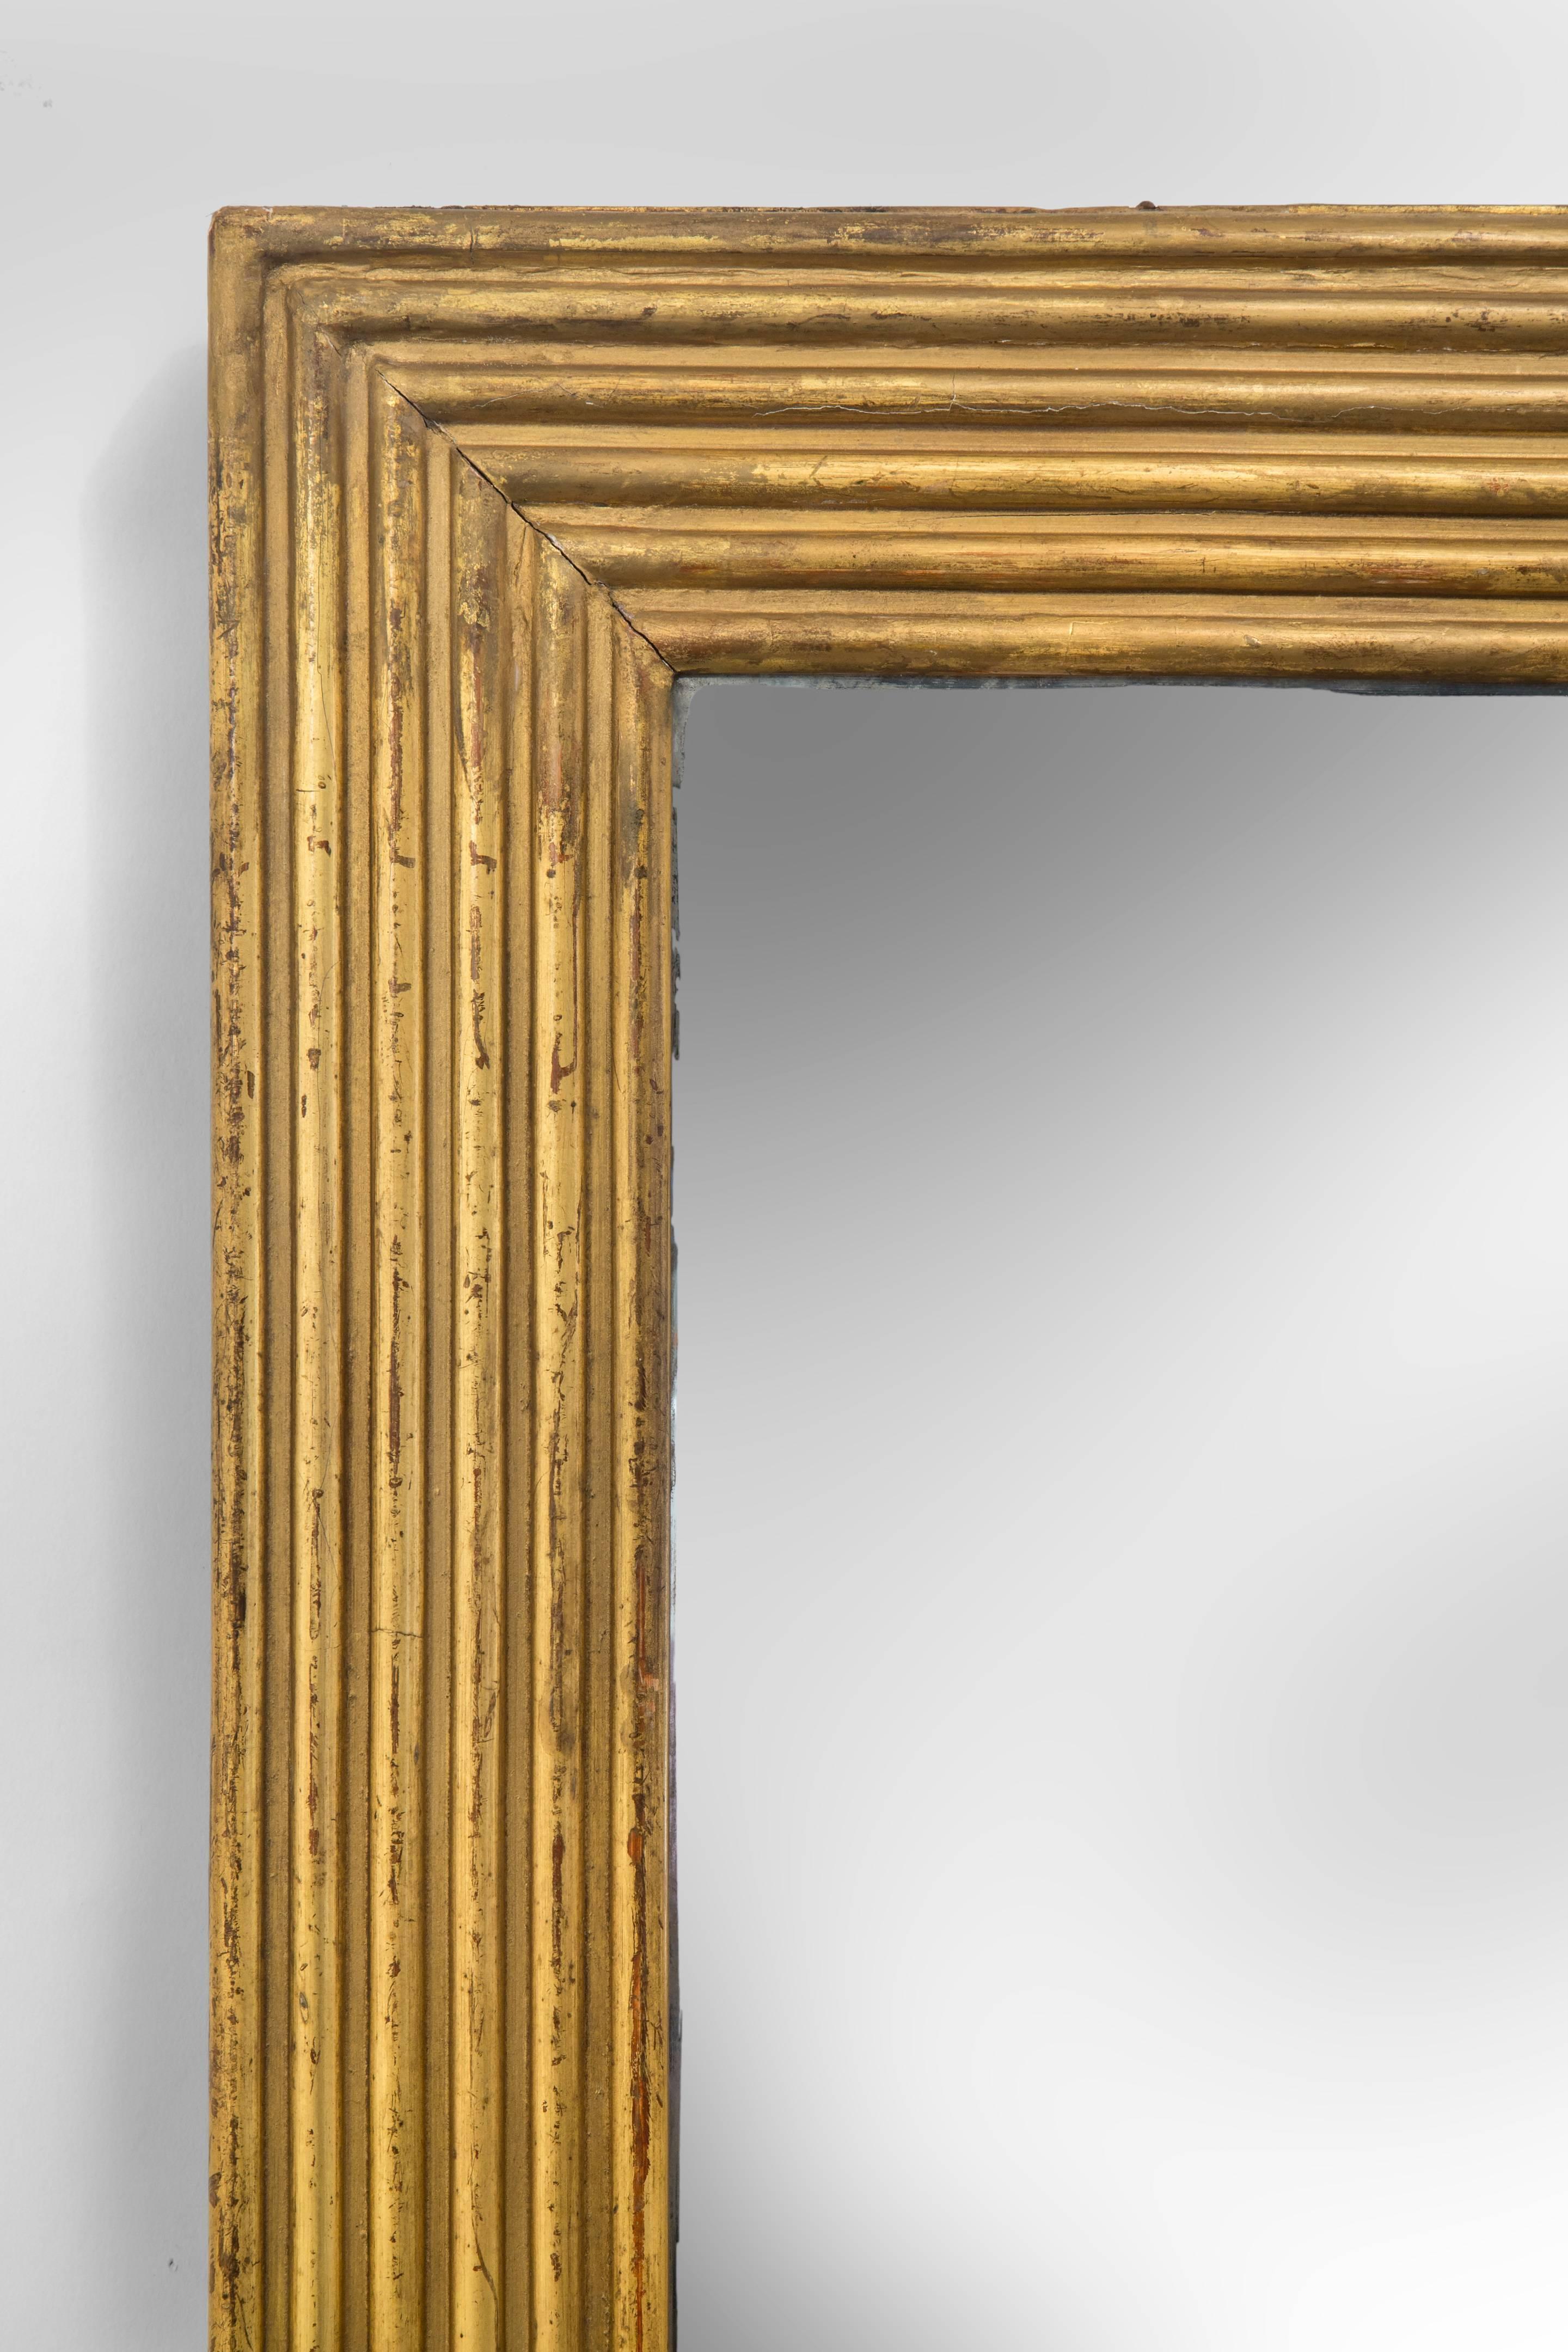 Modern or period, this handsome mirror can work with any period decor.